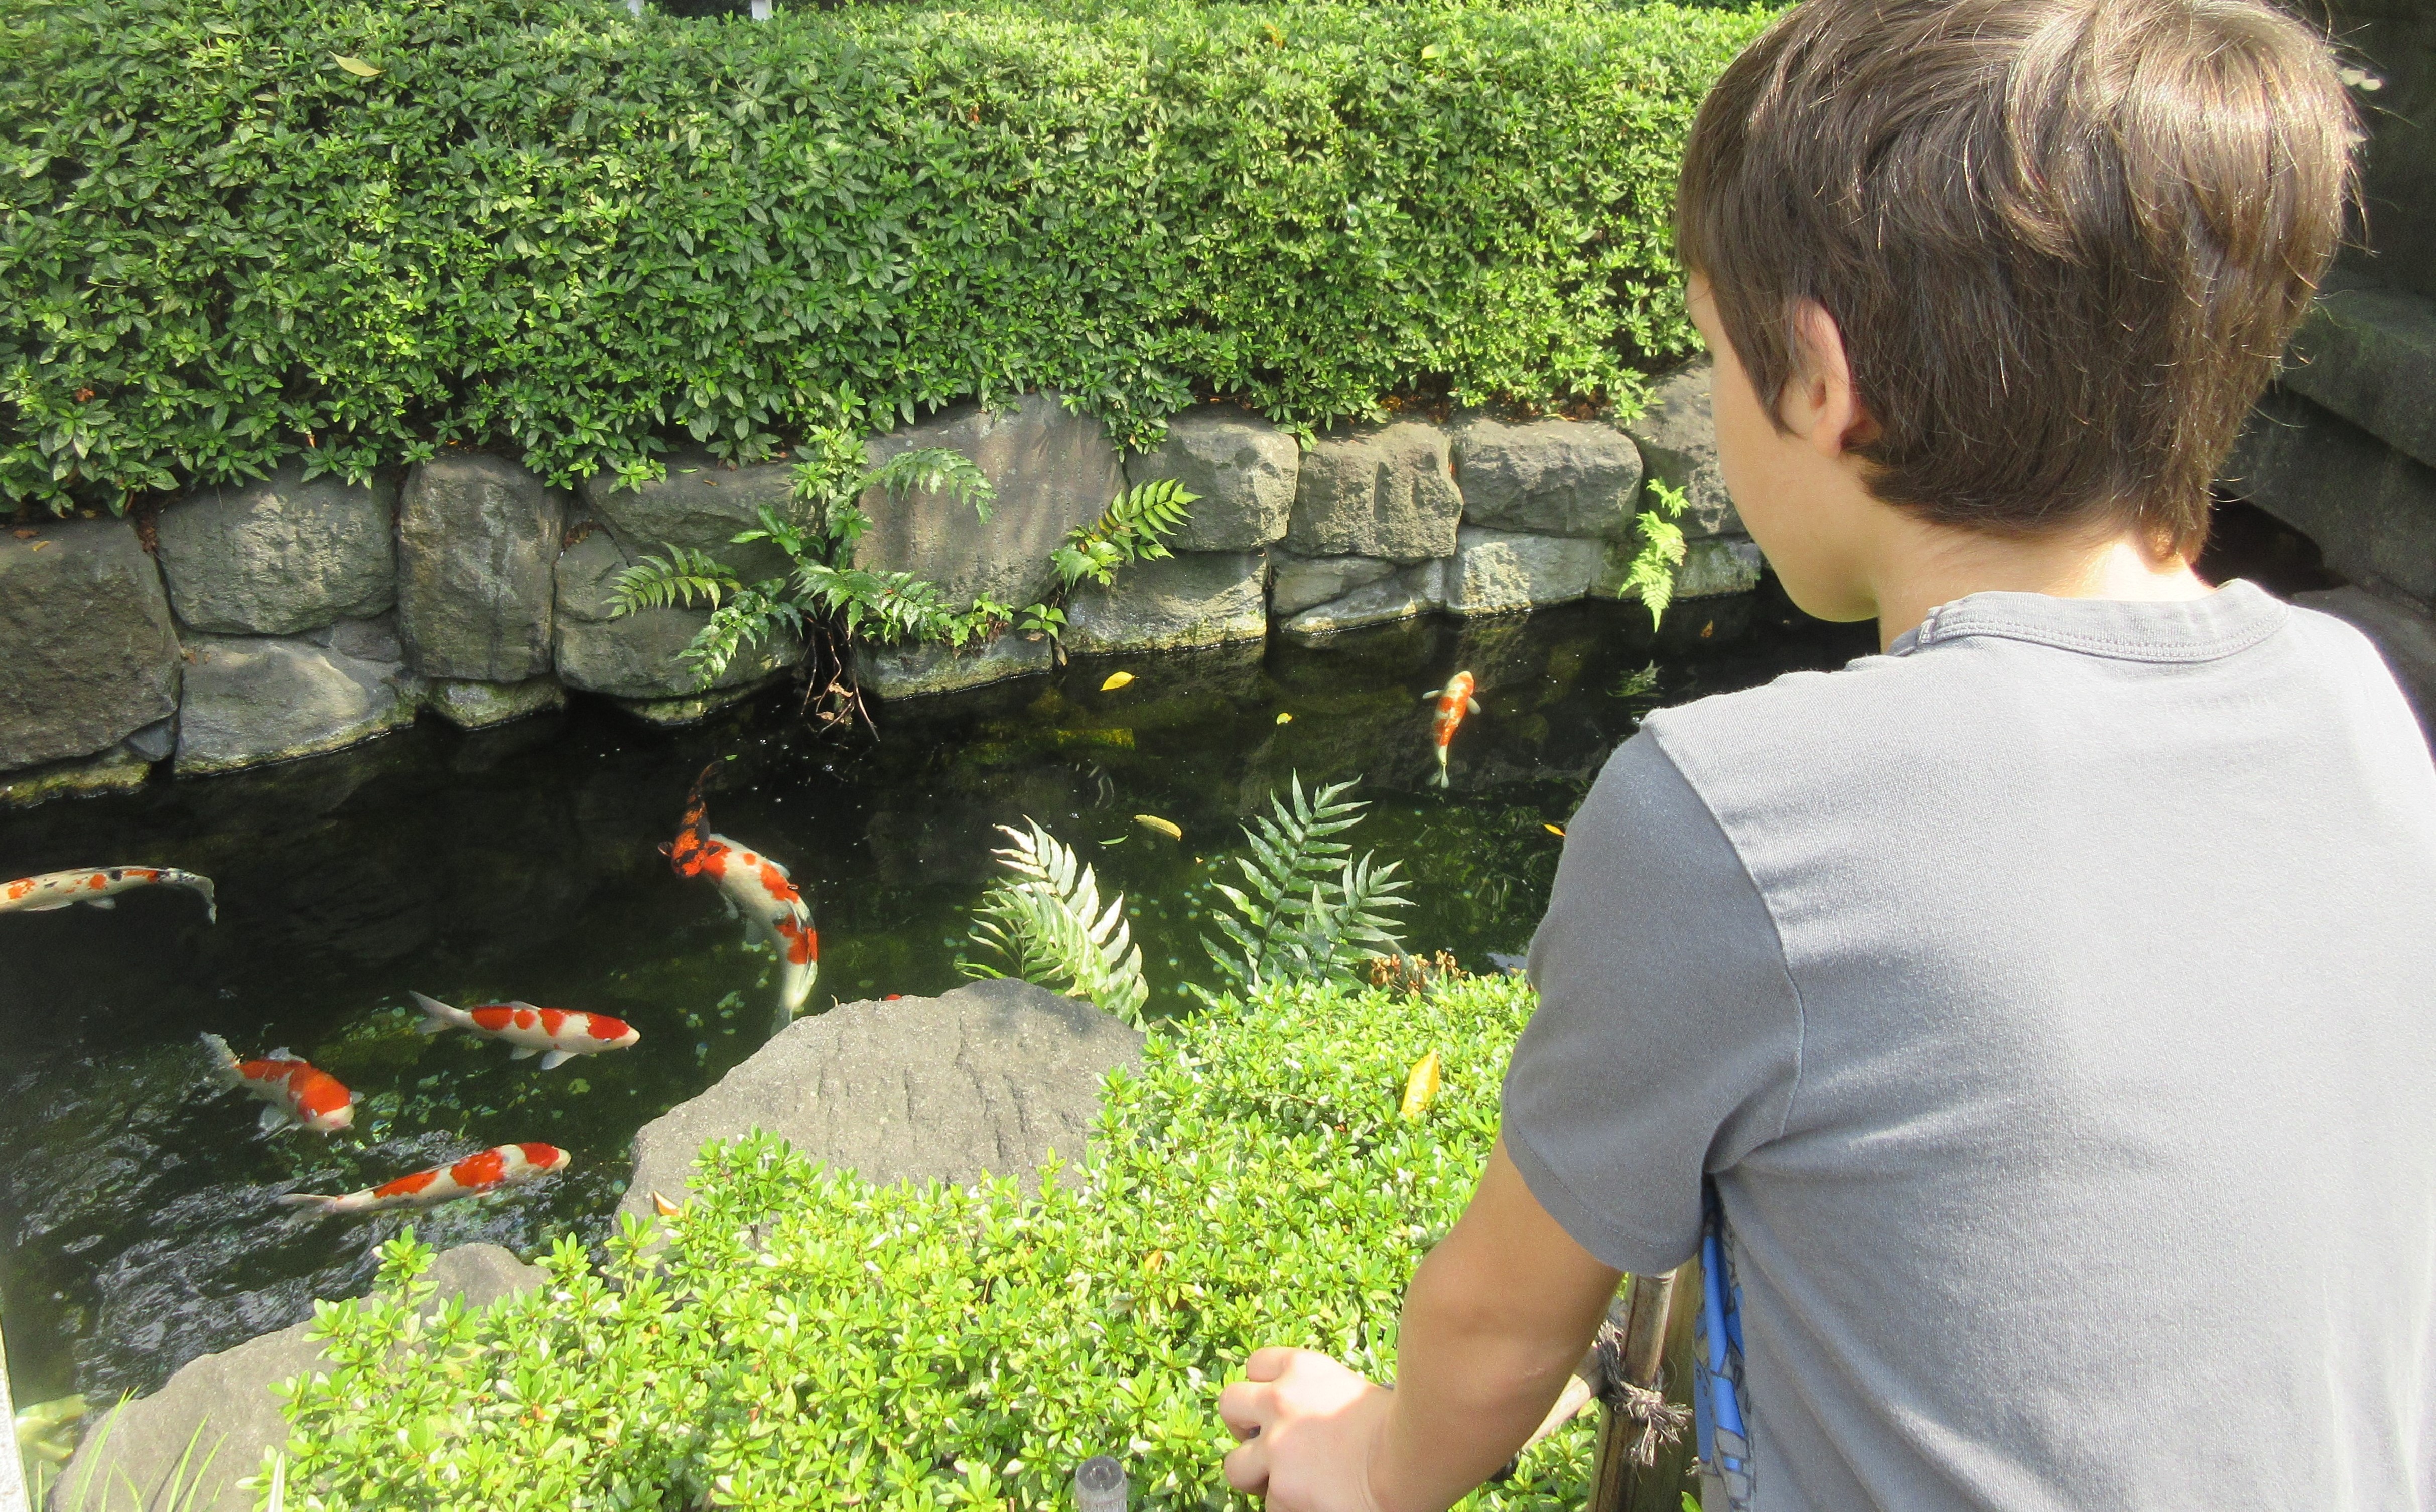 A child observing fish in a pond.